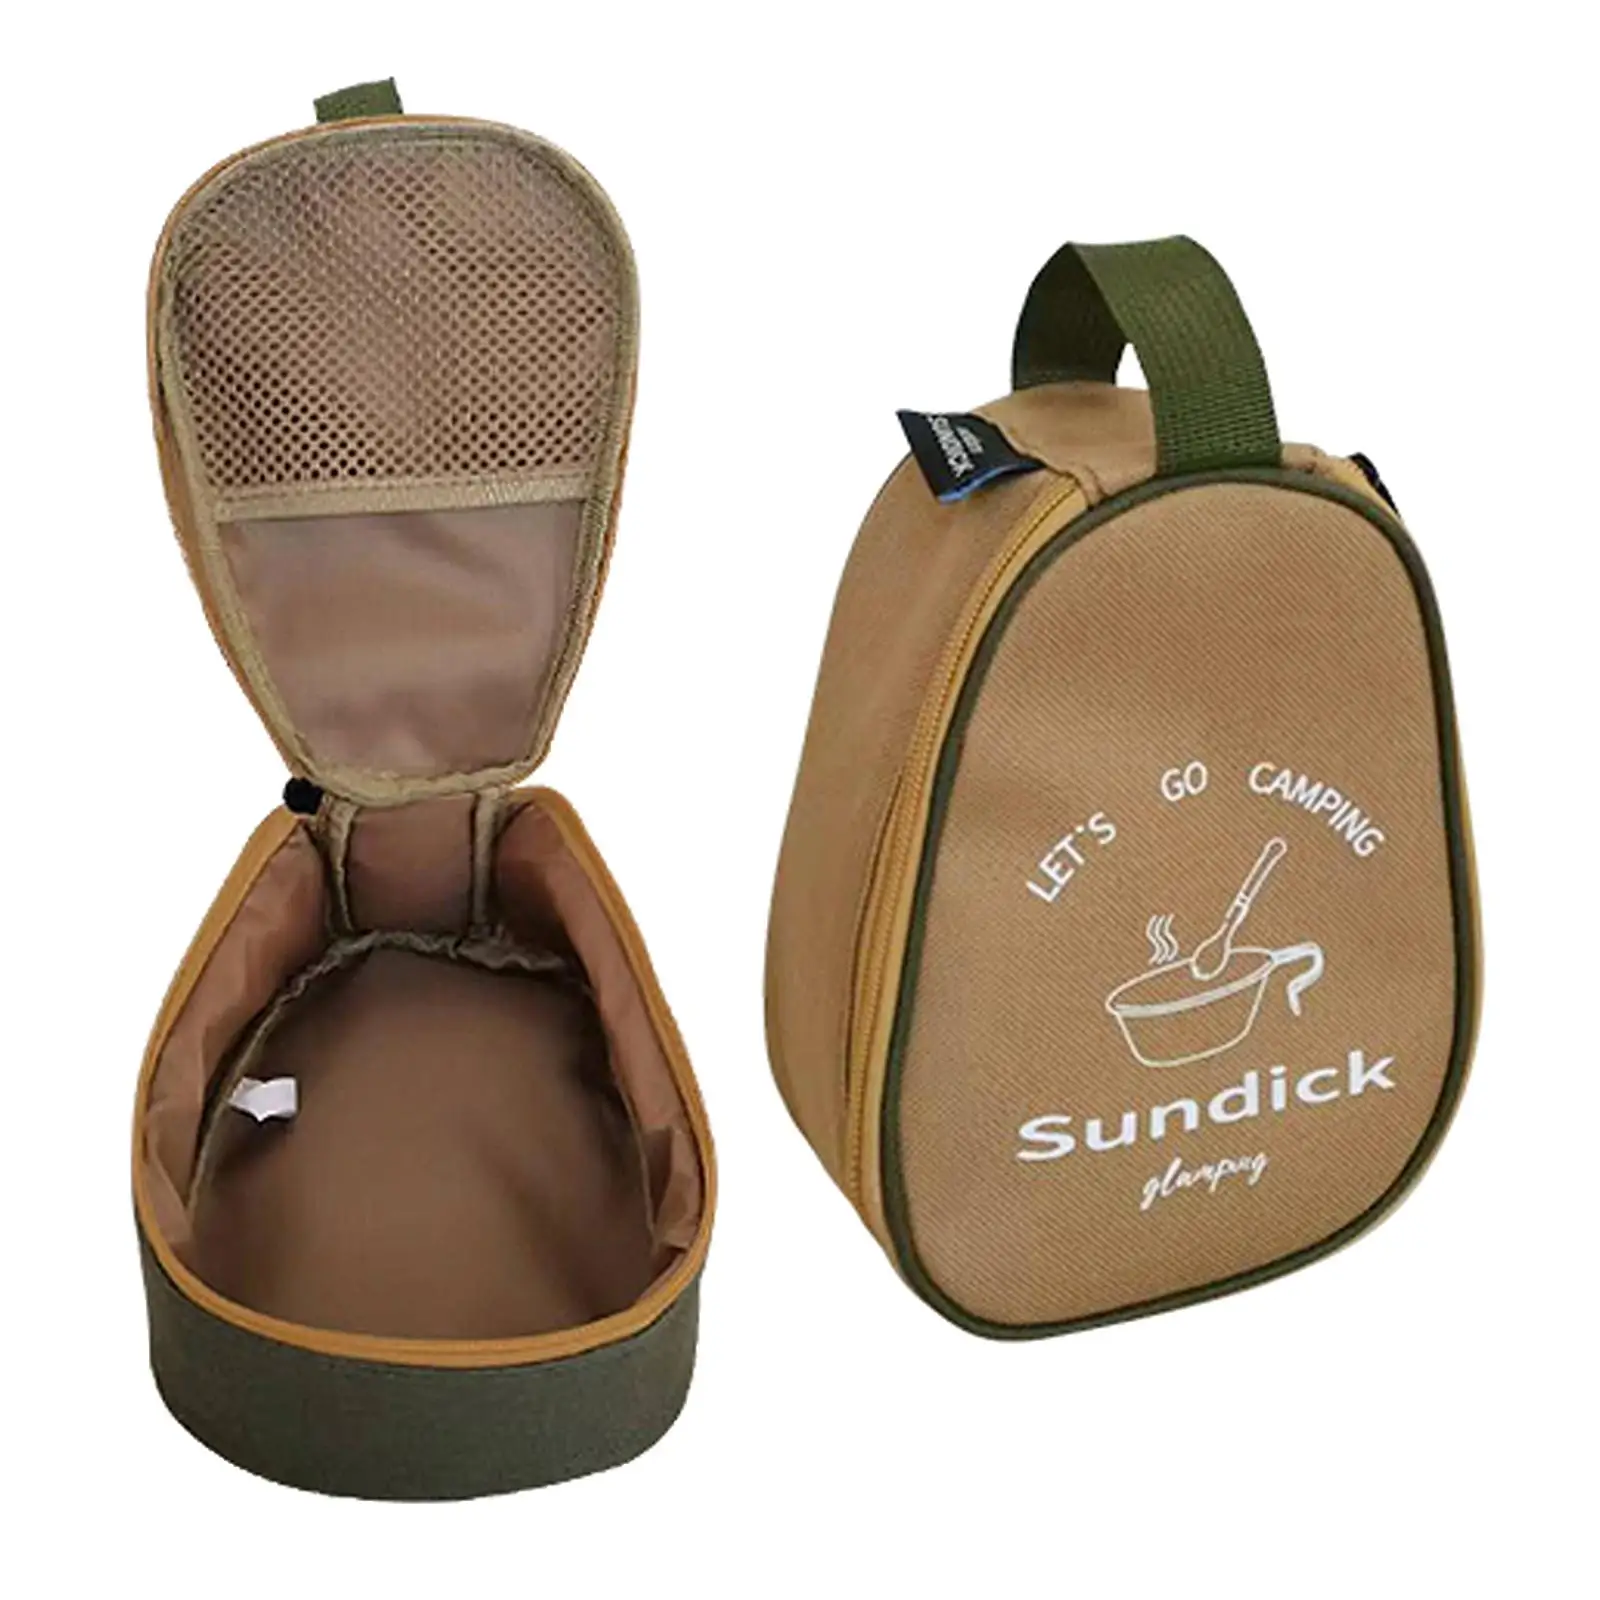 Portable Outdoor Bowls, Cups, Storage Bag, Camp, Travel, Hiking, Accessories, Cookware Container